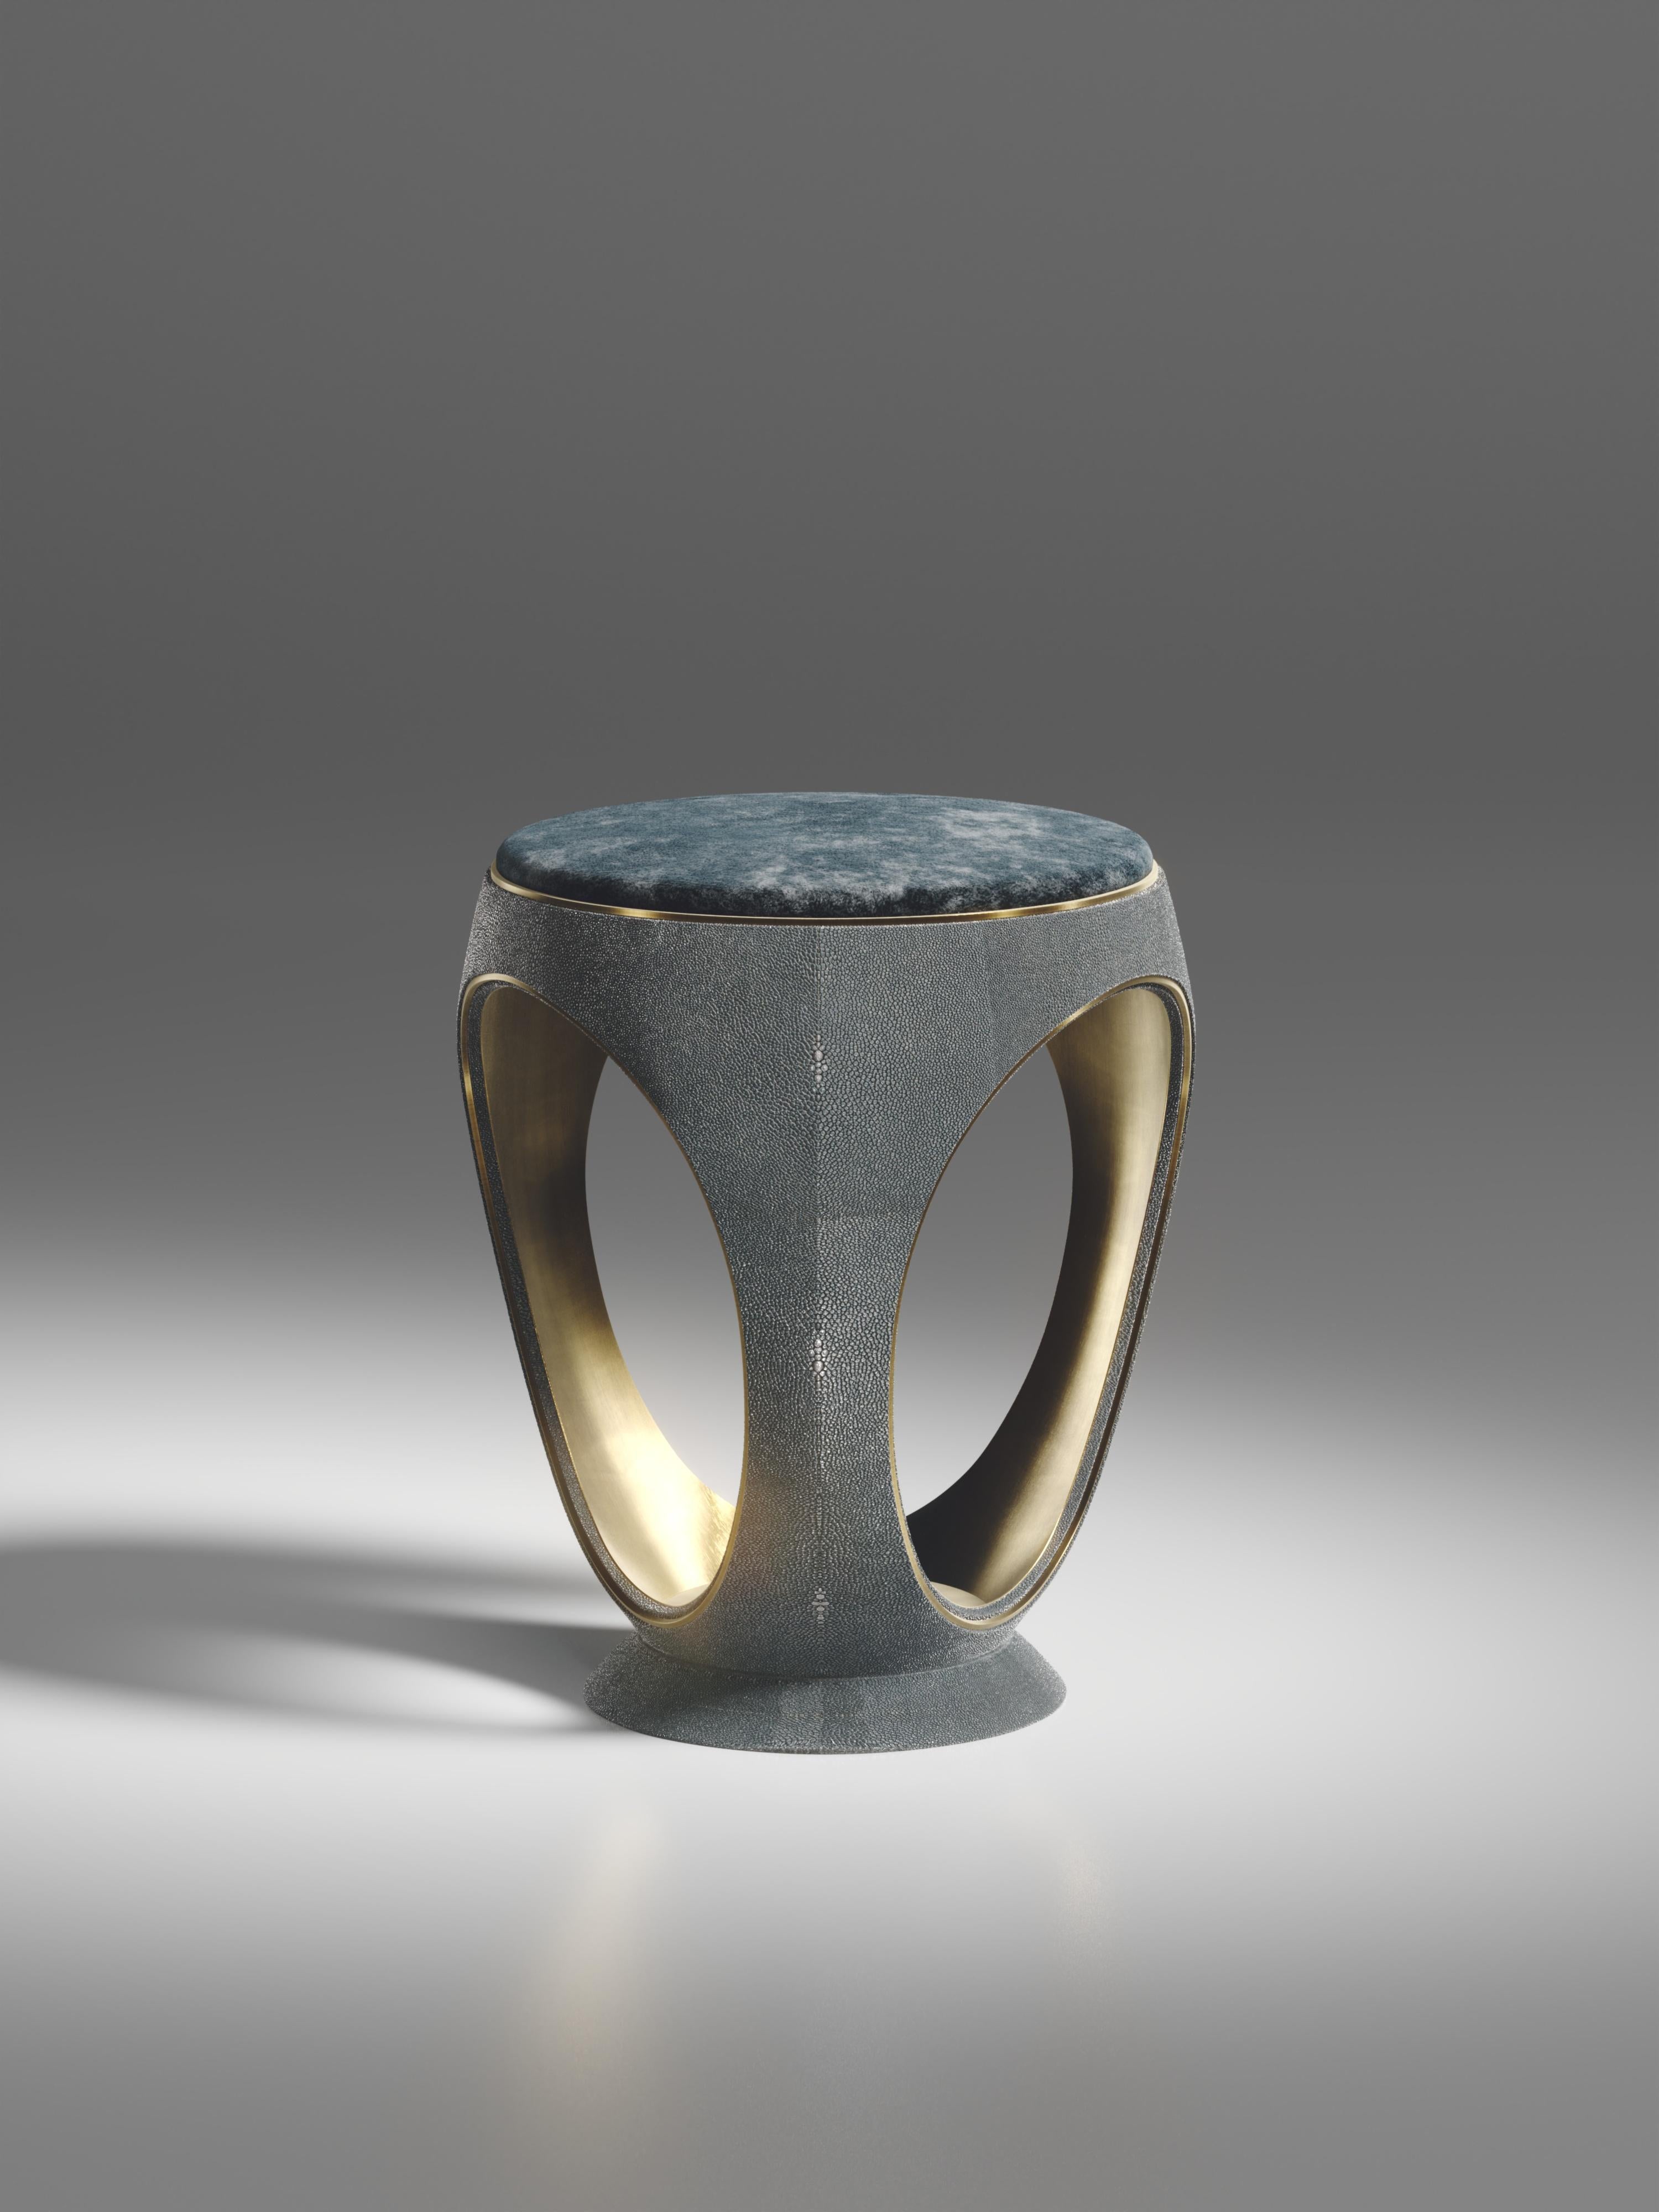 The ring stool in blue shagreen is one of the most iconic pieces of the R&Y Augousti Collection. A sculptural, jewel-like shape, this piece has been revamped with a discreet bronze-patina brass indentation detail on the exterior, as well as the